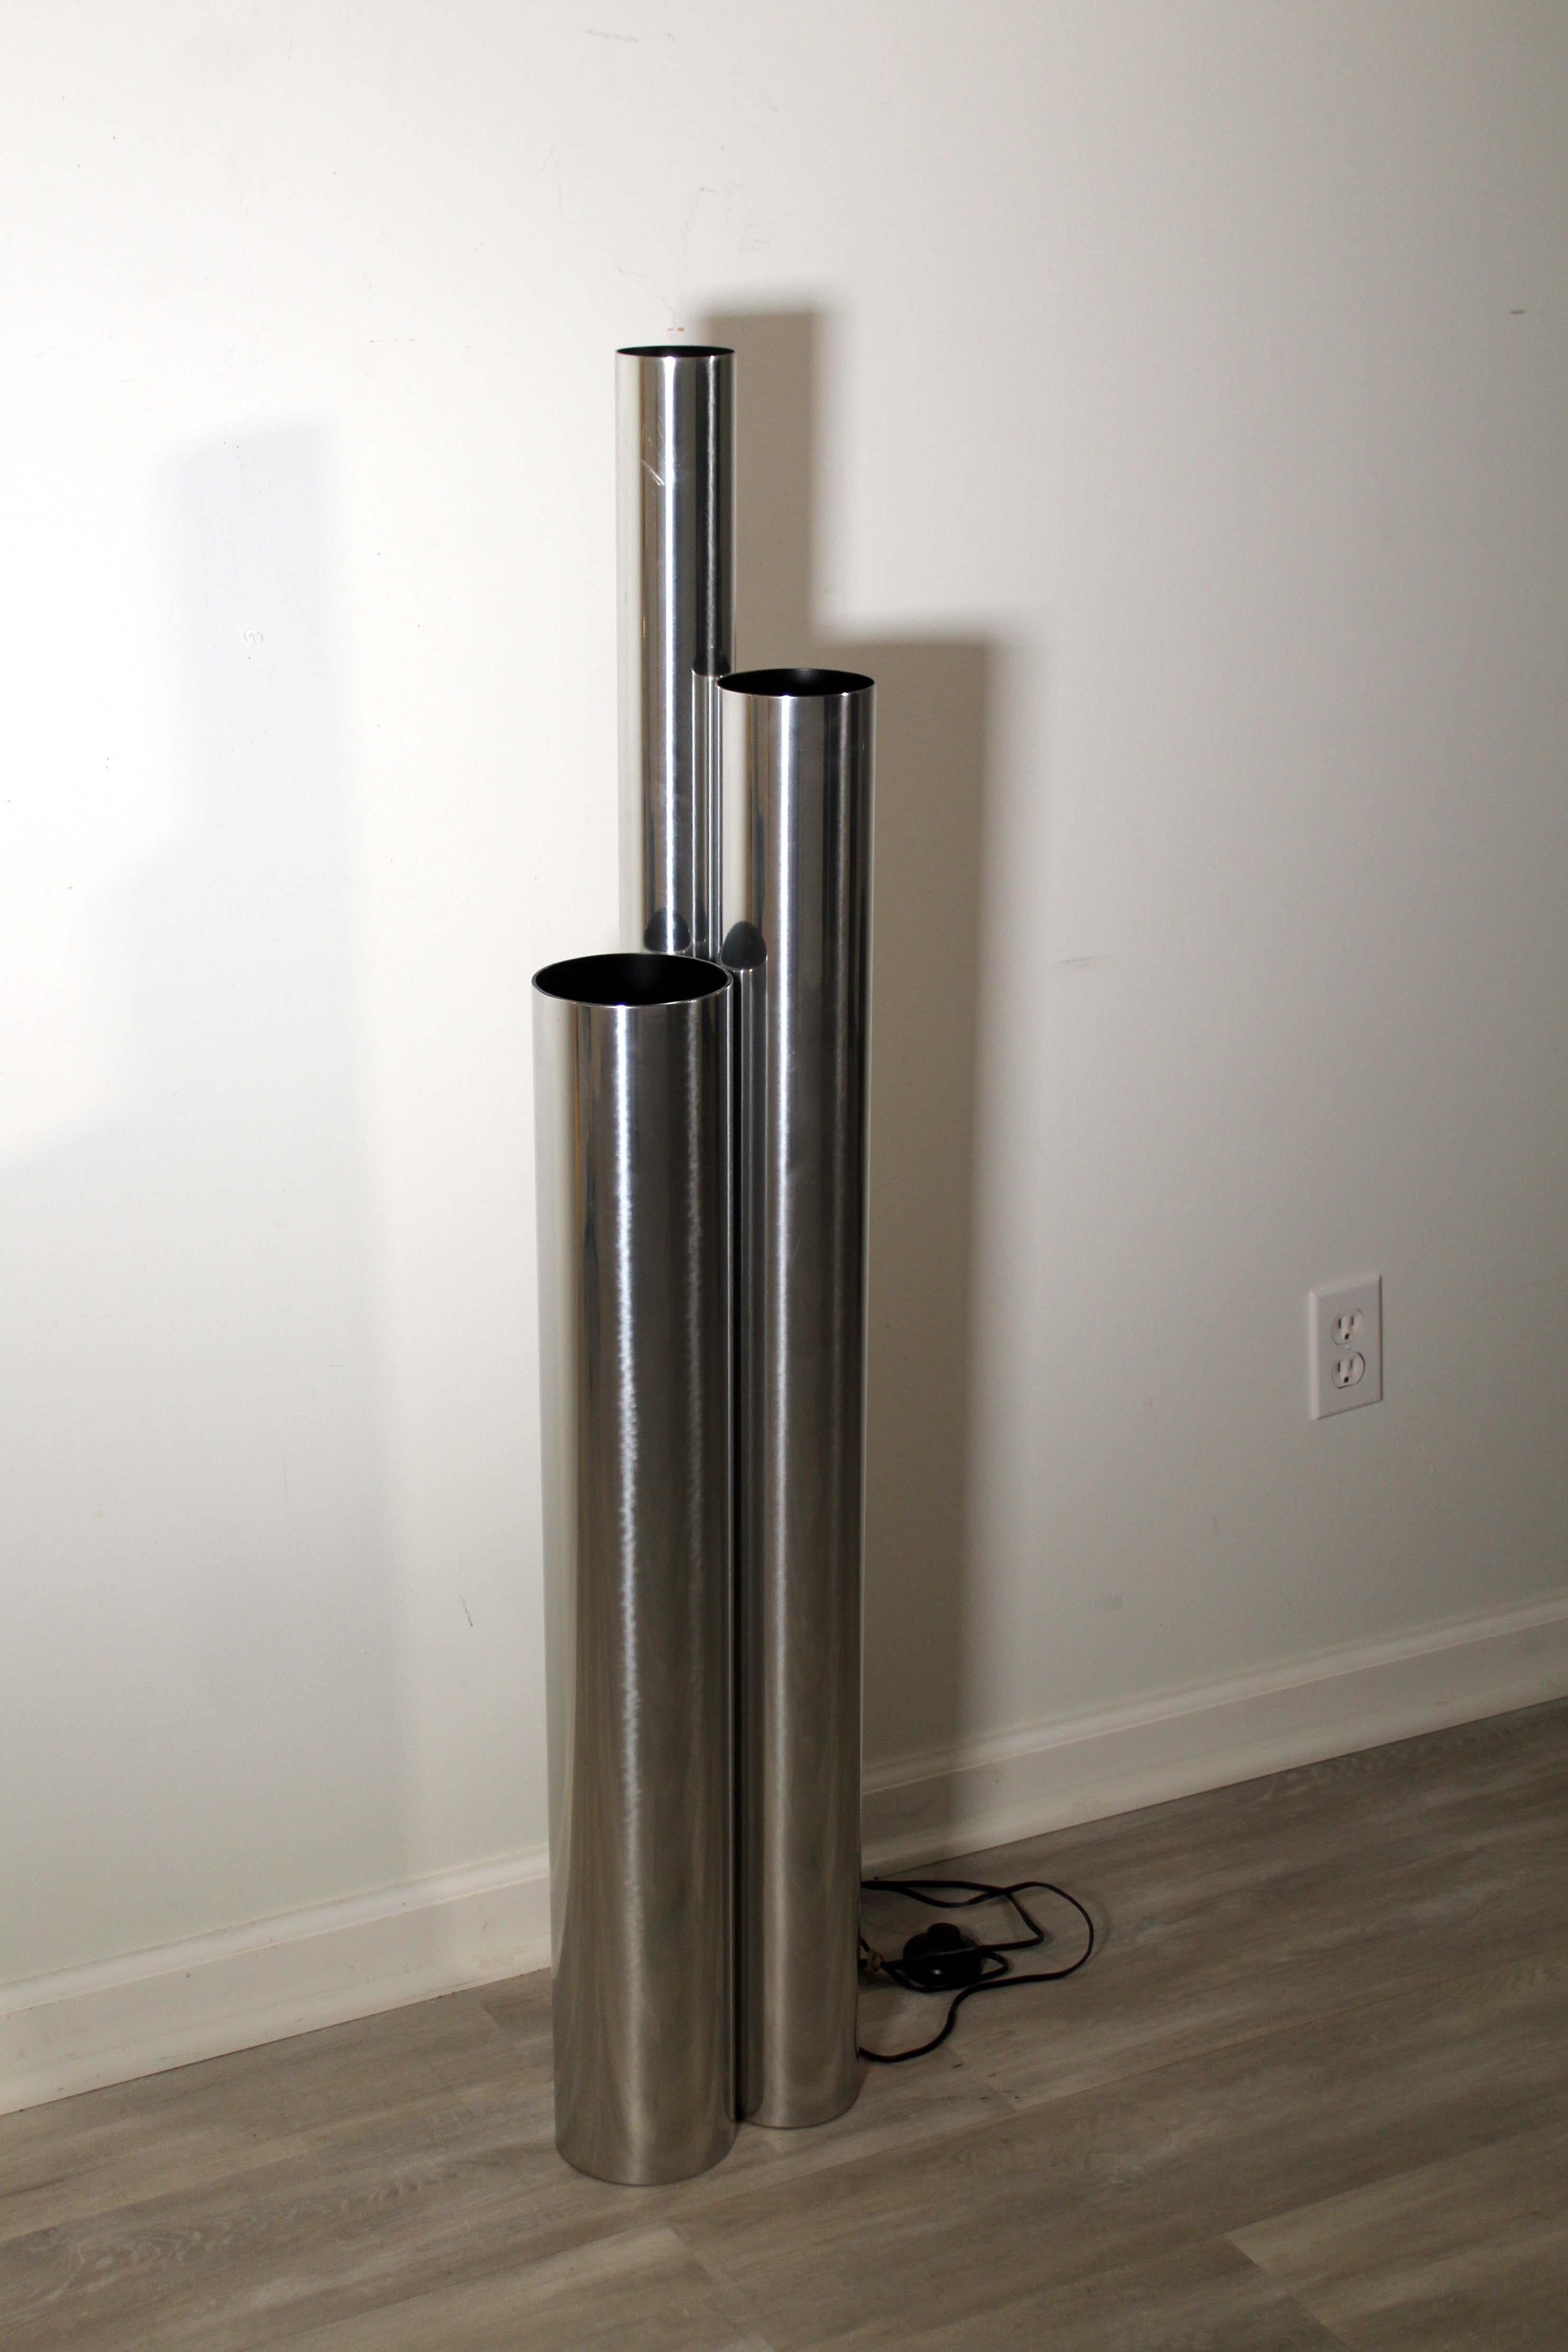 This tubular Robert Sonneman 3 tubed chrome floor lamp is up for consideration. Three different sized tubes combined into one structure gives this floor lamp a unique feel. It would look great in any home it goes to! Pedal to turn on the lamp. In